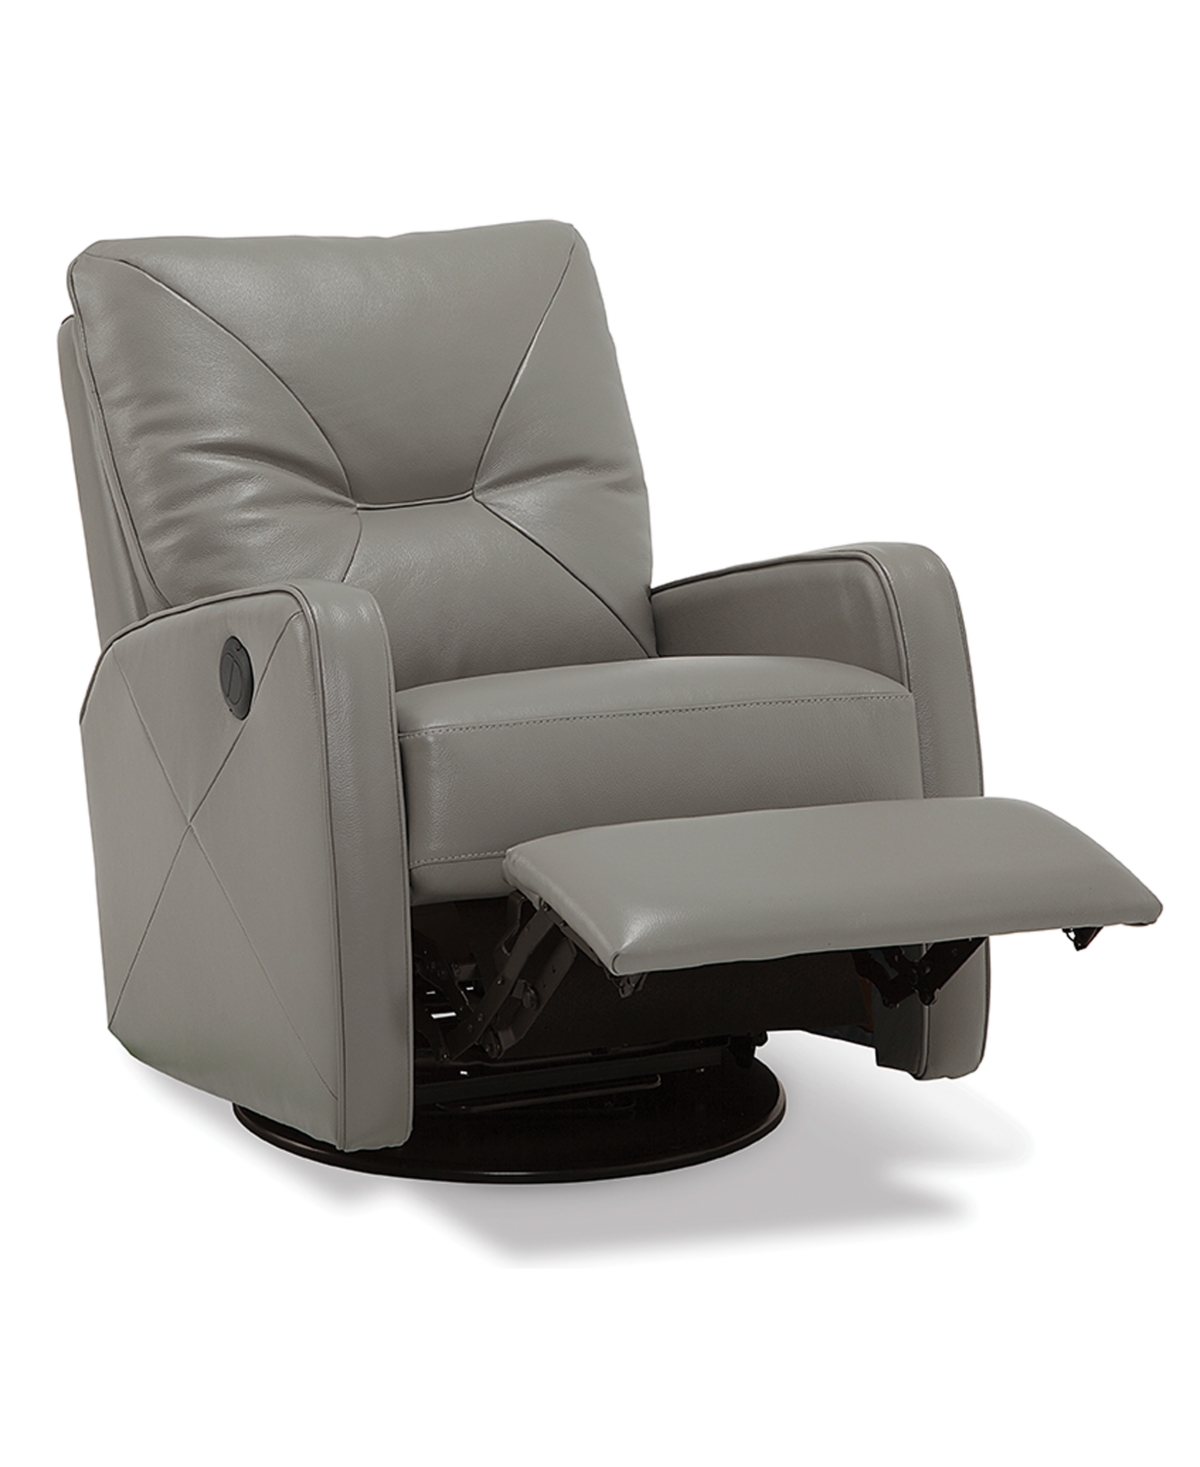 Finchley Leather Power Swivel Glider Recliner